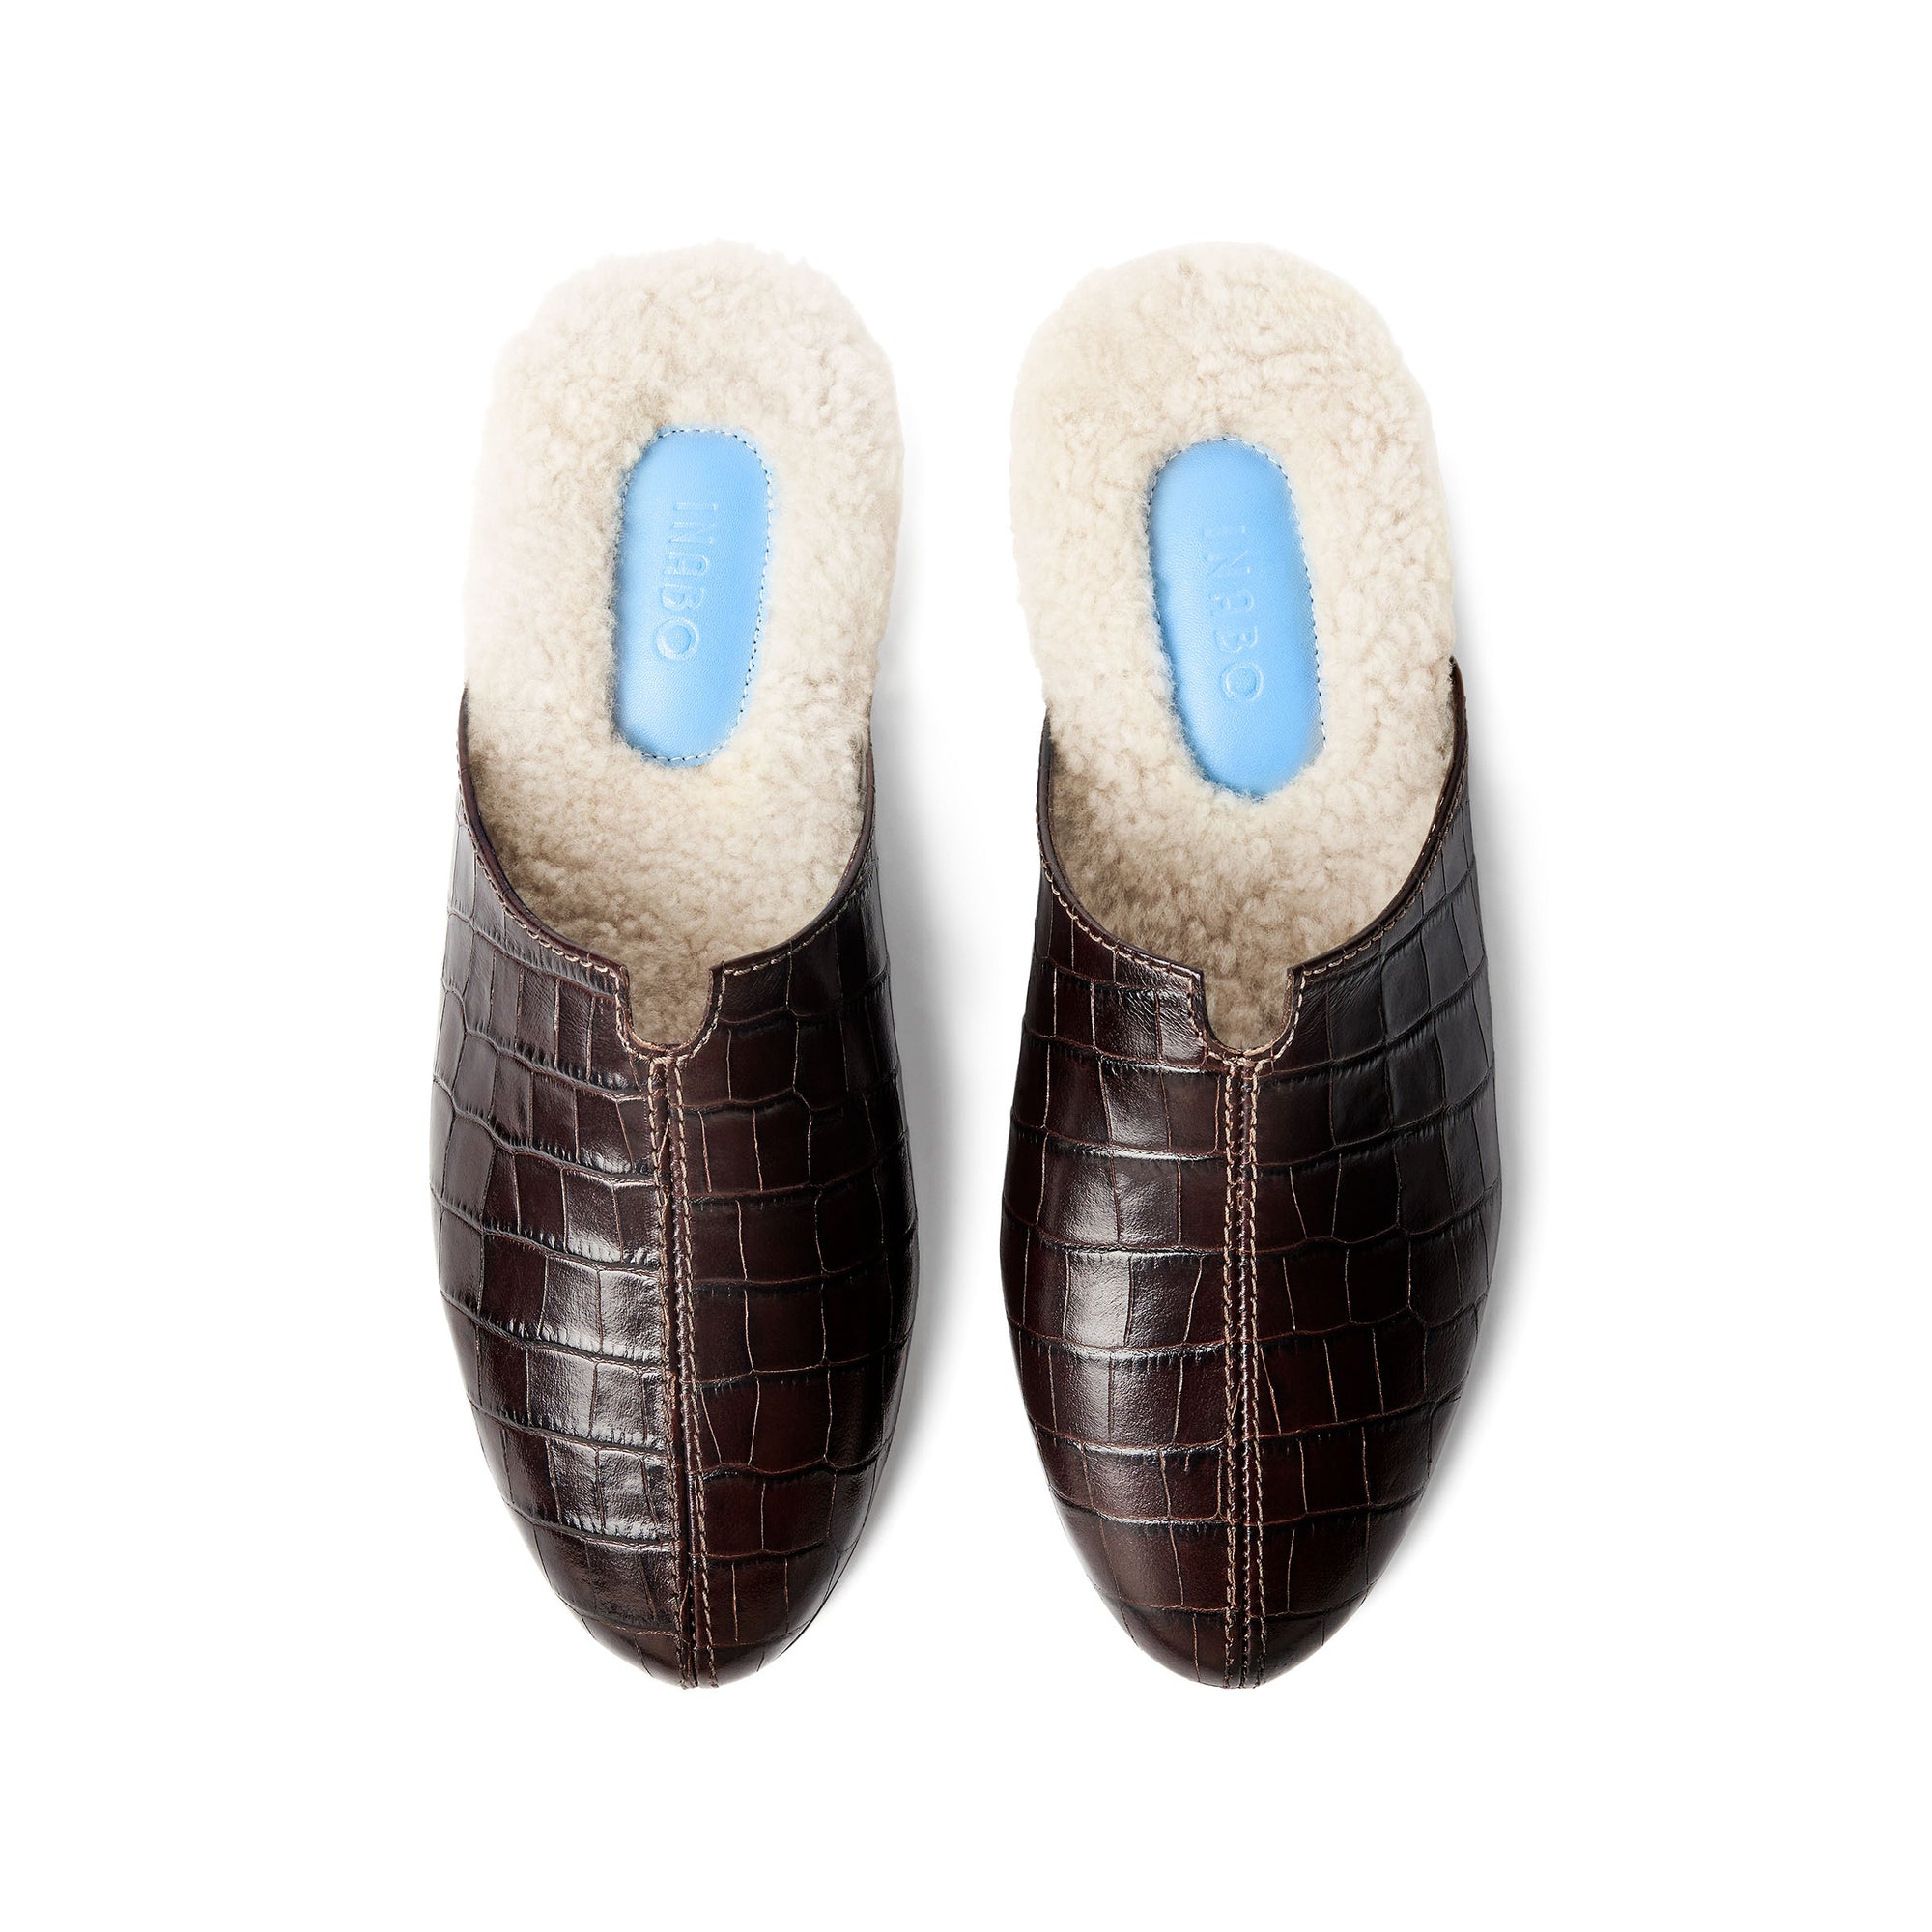 Inabo Women's Little Bite Slipper in brown croc embossed nappa, whit white shearling insole and light blue logo shown from above